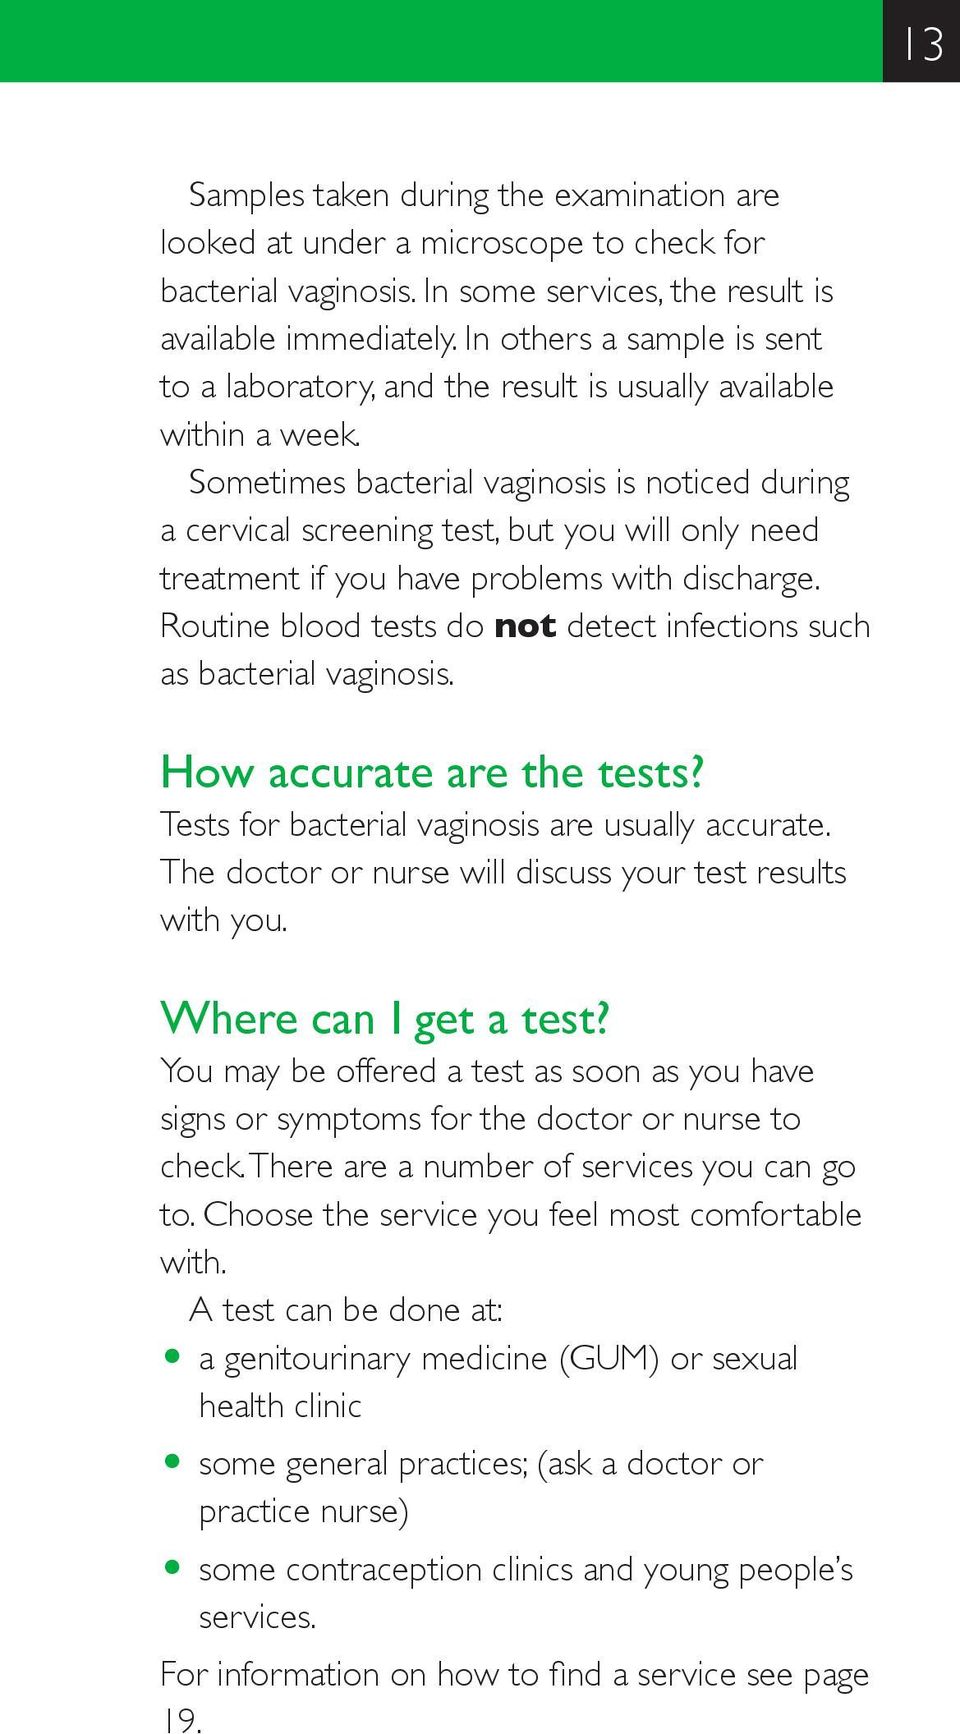 Sometimes bacterial vaginosis is noticed during a cervical screening test, but you will only need treatment if you have problems with discharge.